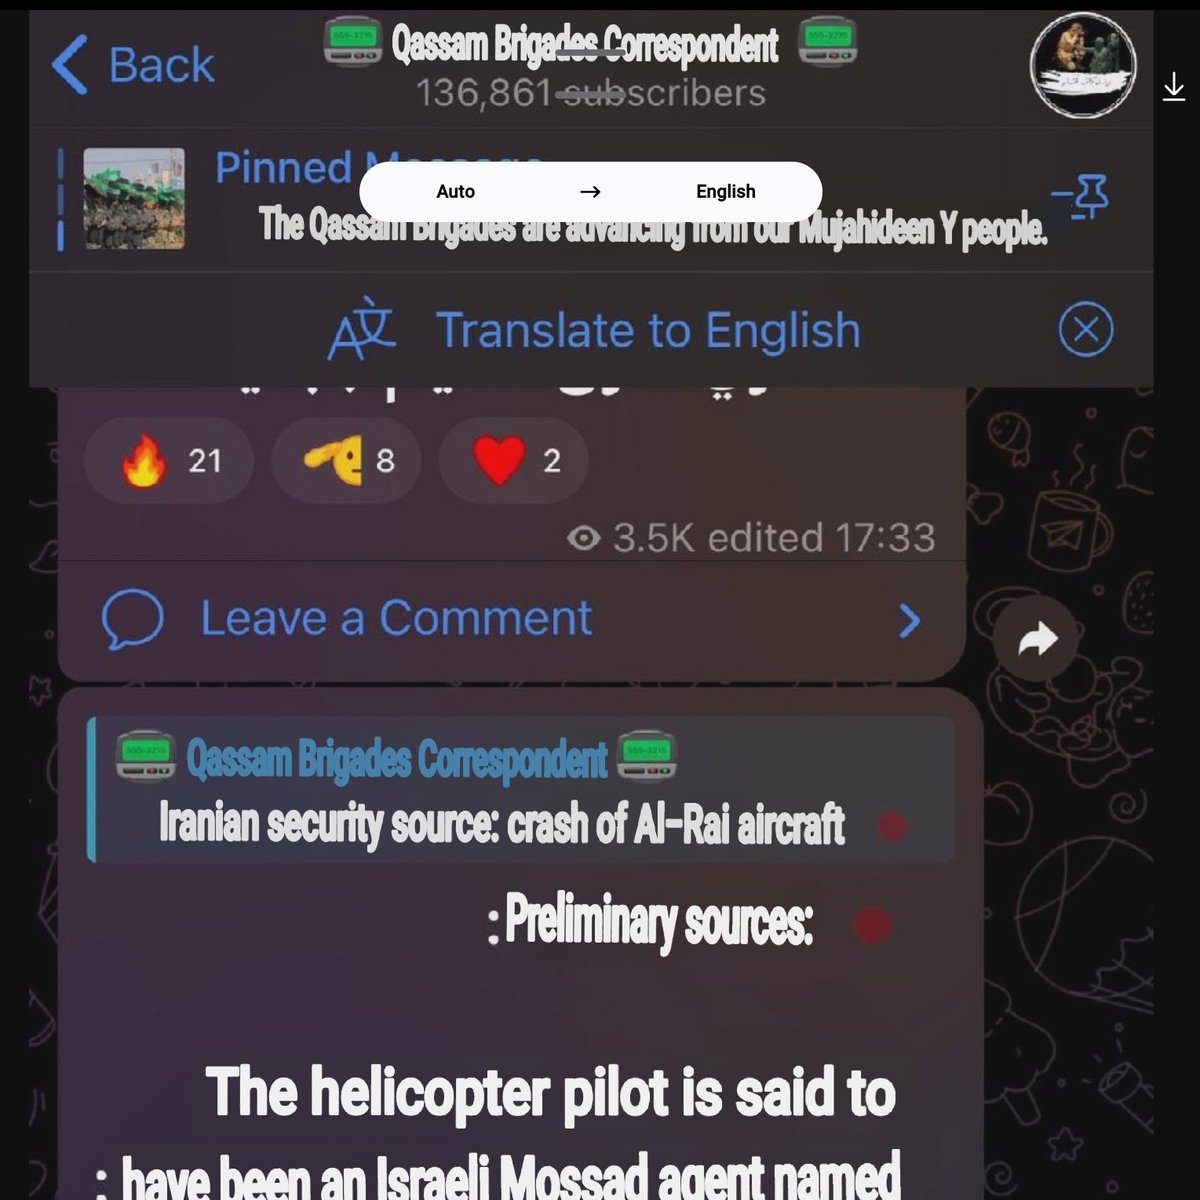 Hamas Telegram has picked up a joke that Raisi's pilot was a Mossad agent called Eli Copter and is pushing it as fact. These are the same geniuses that the mainstream media has been getting casualty numbers from for 7 months and publishing them without verification